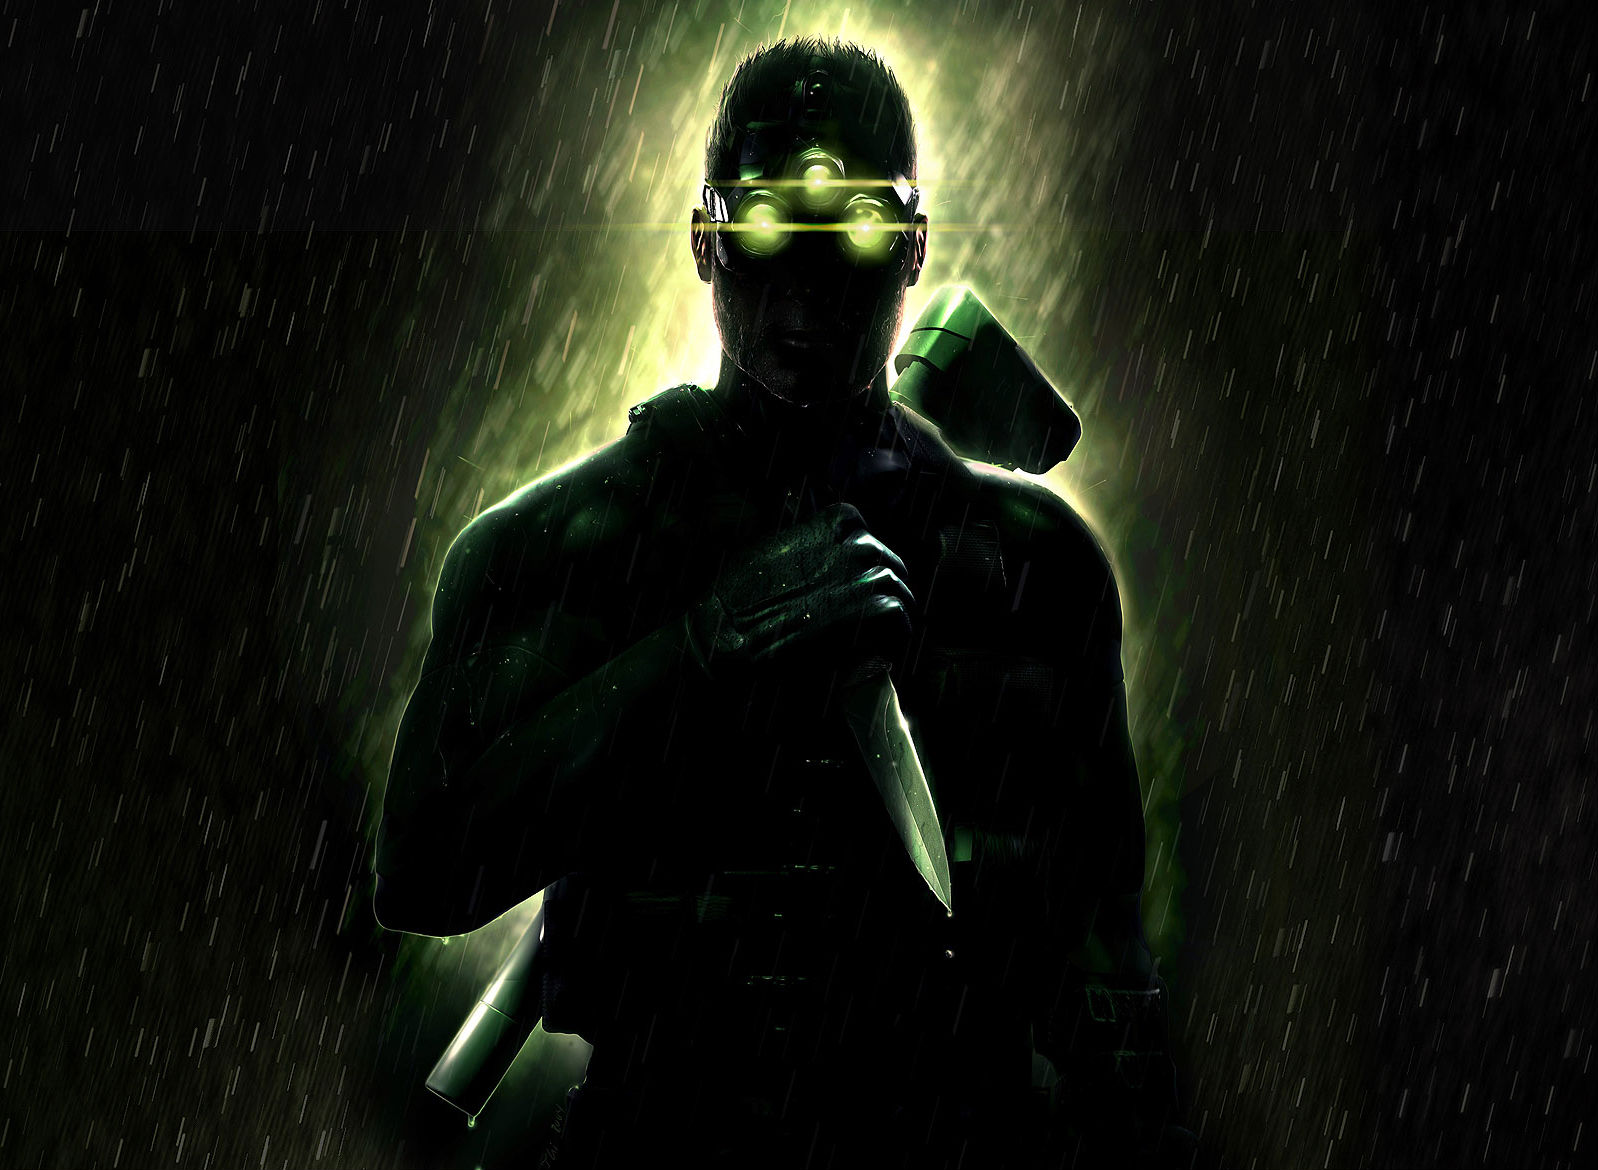 tom clancy's splinter cell: chaos theory, video game, tom clancy's